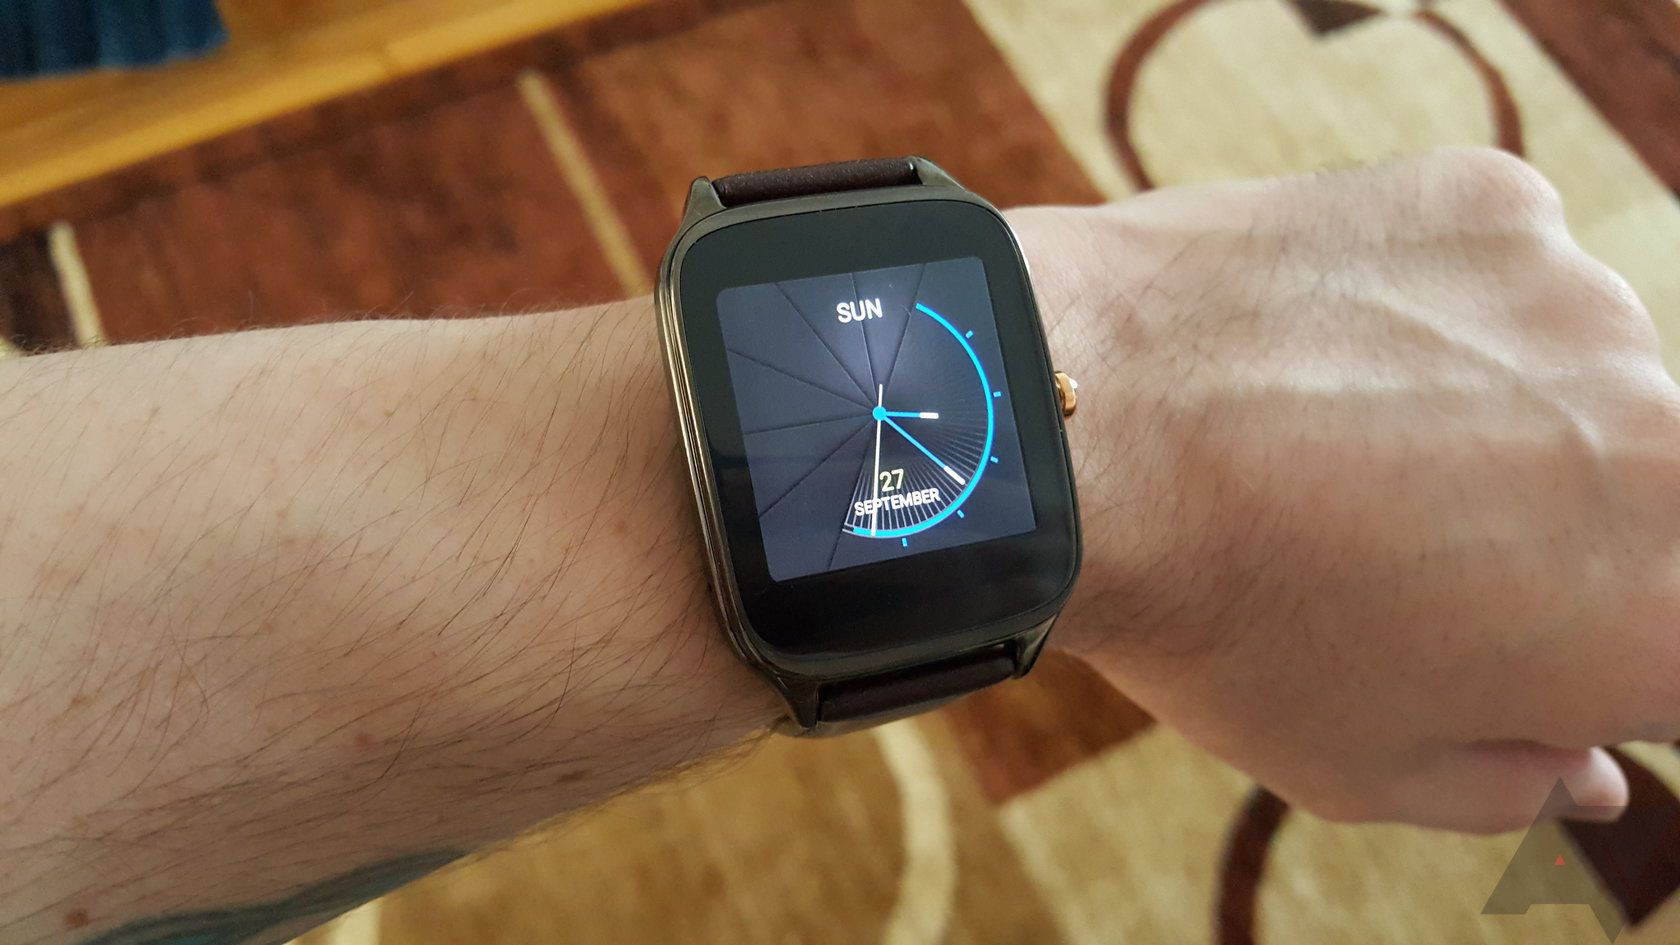 Turbulentie Bij zonsopgang Hub Asus ZenWatch 2 Review: The First True Entry-Level Android Wear Watch  [Update: Small Version Comparison]